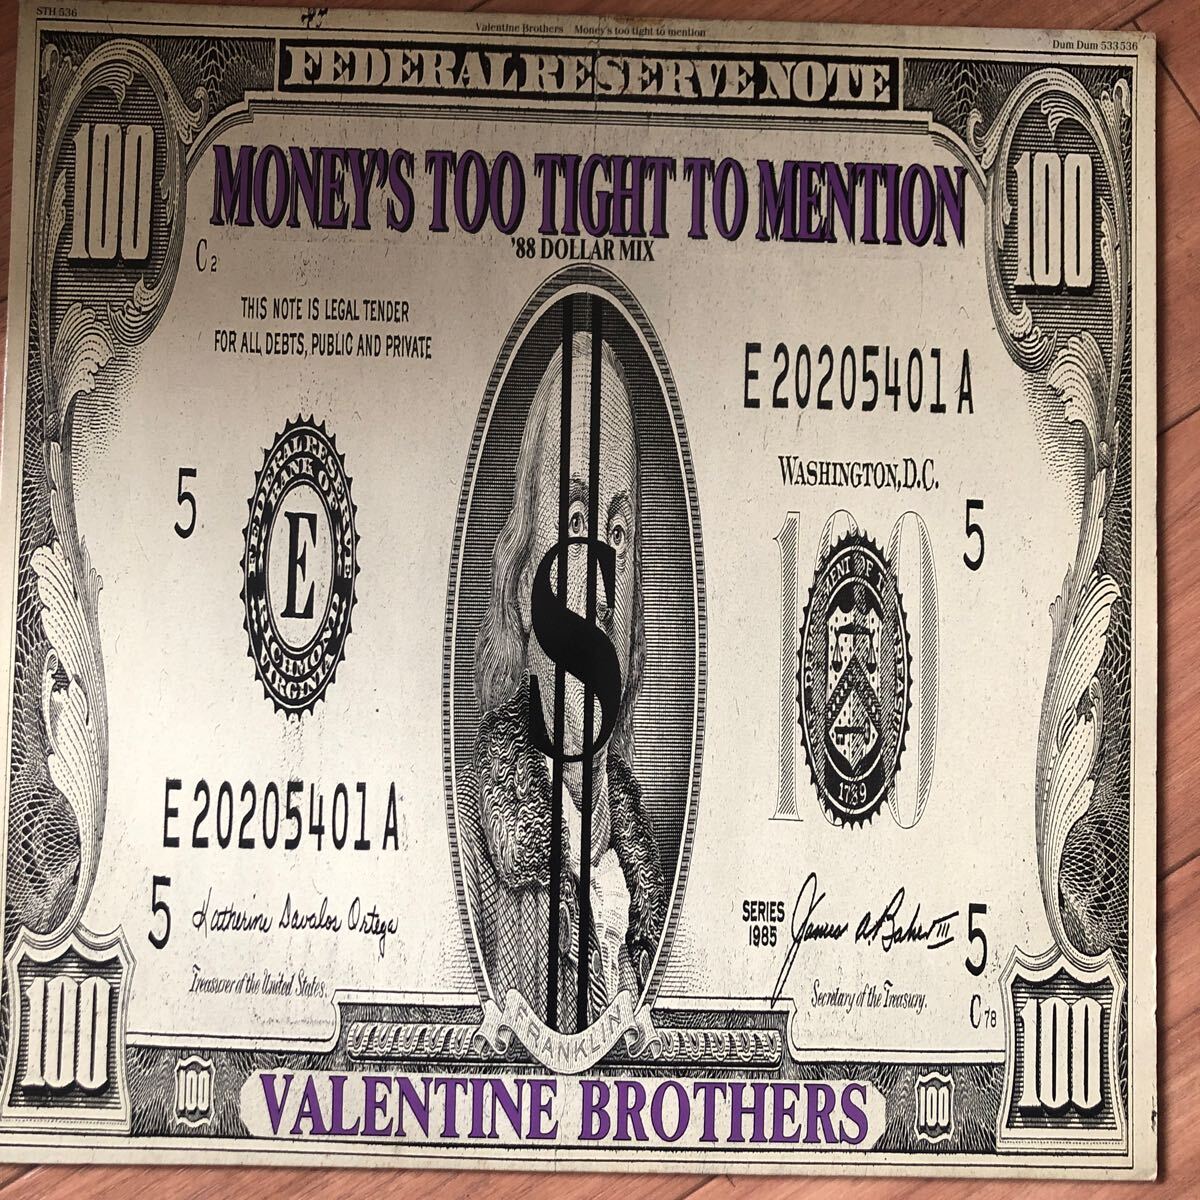 12’ Valentine Brothers-Money’s too tight to mention/ 88 dollar mixの画像1